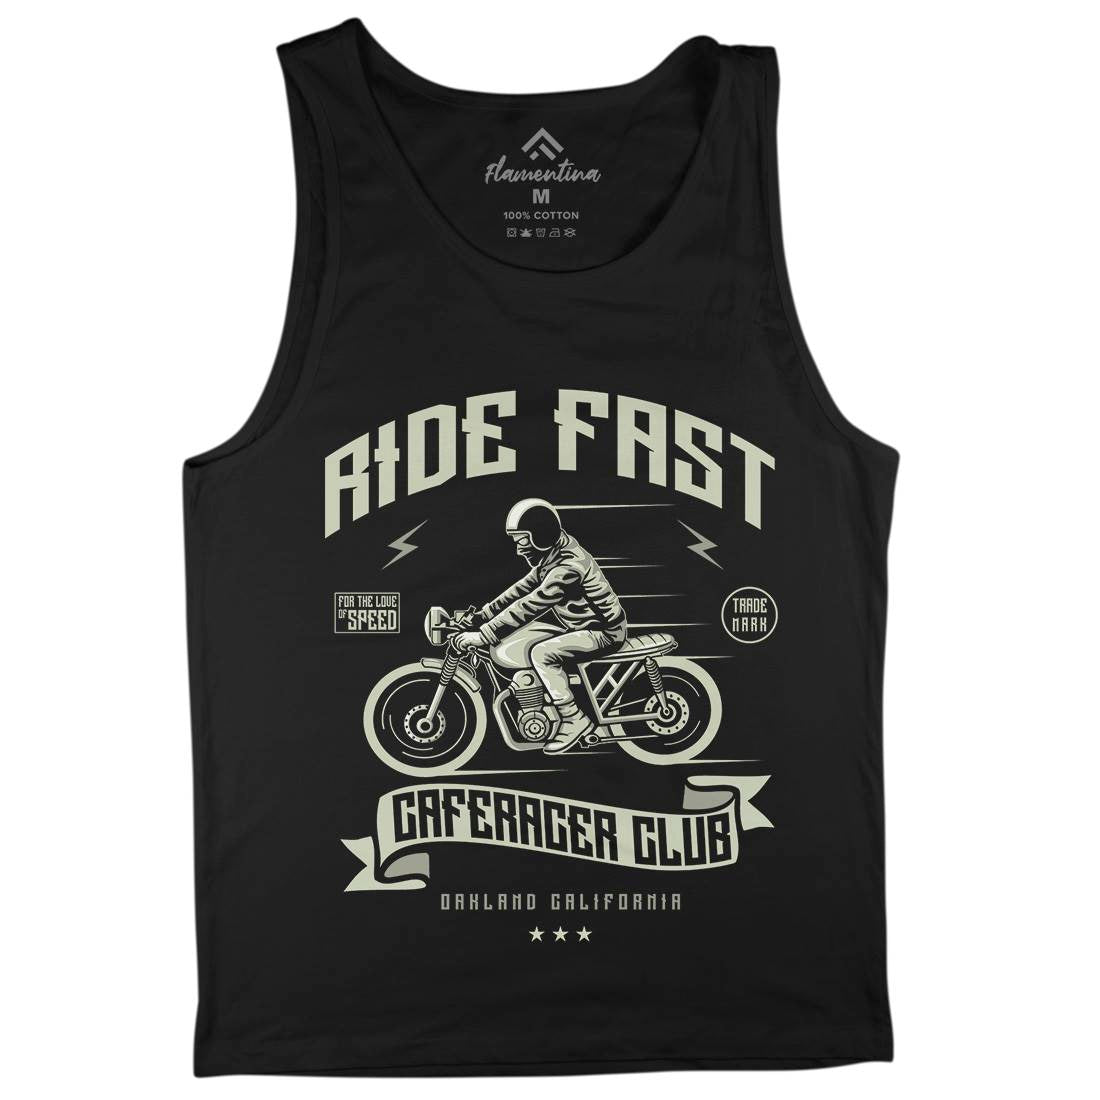 Ride Fast Mens Tank Top Vest Motorcycles A117